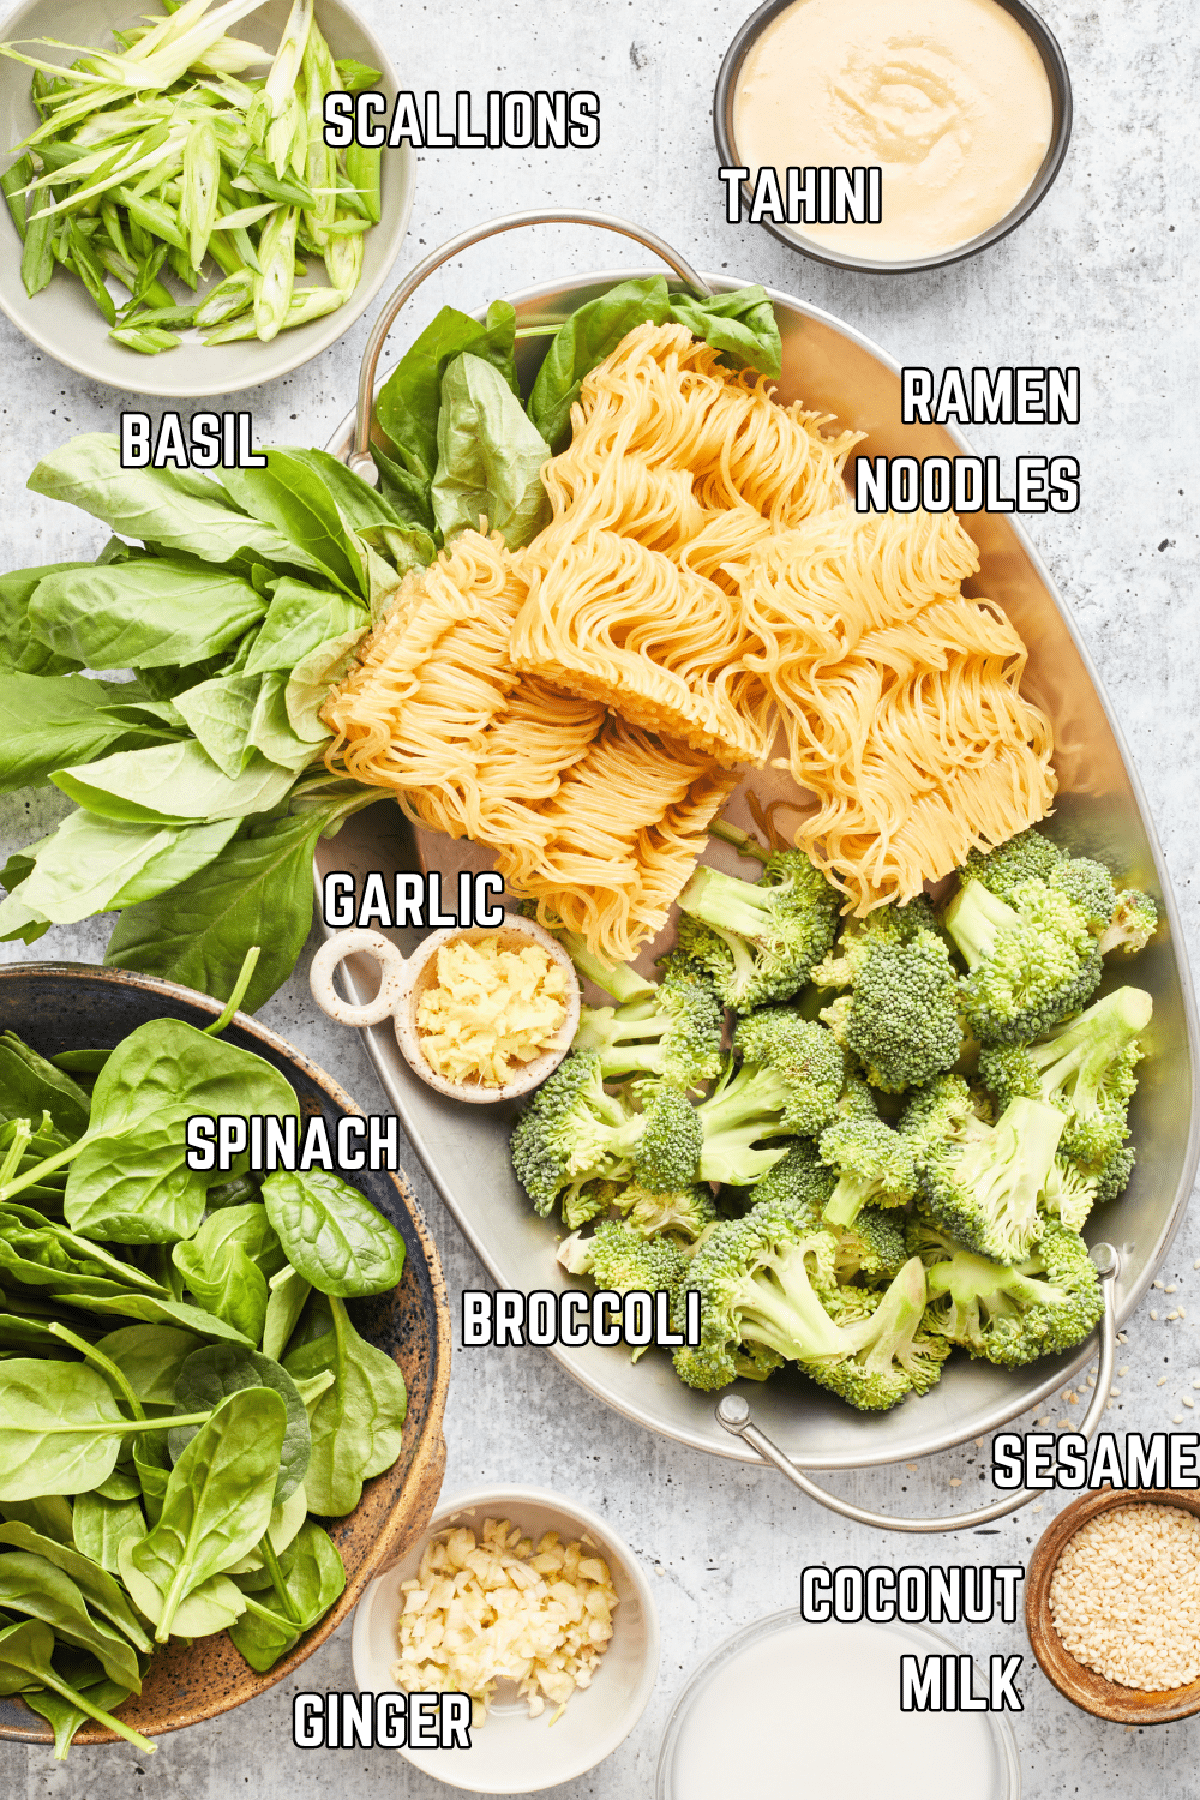 Overhead view of several bowls of ingredients to make ginger sesame noodles: scallions, tahini, fresh basil, ramen noodles, fresh minced garlic, broccoli, spinach, fresh minced ginger, sesame seeds, and coconut milk.